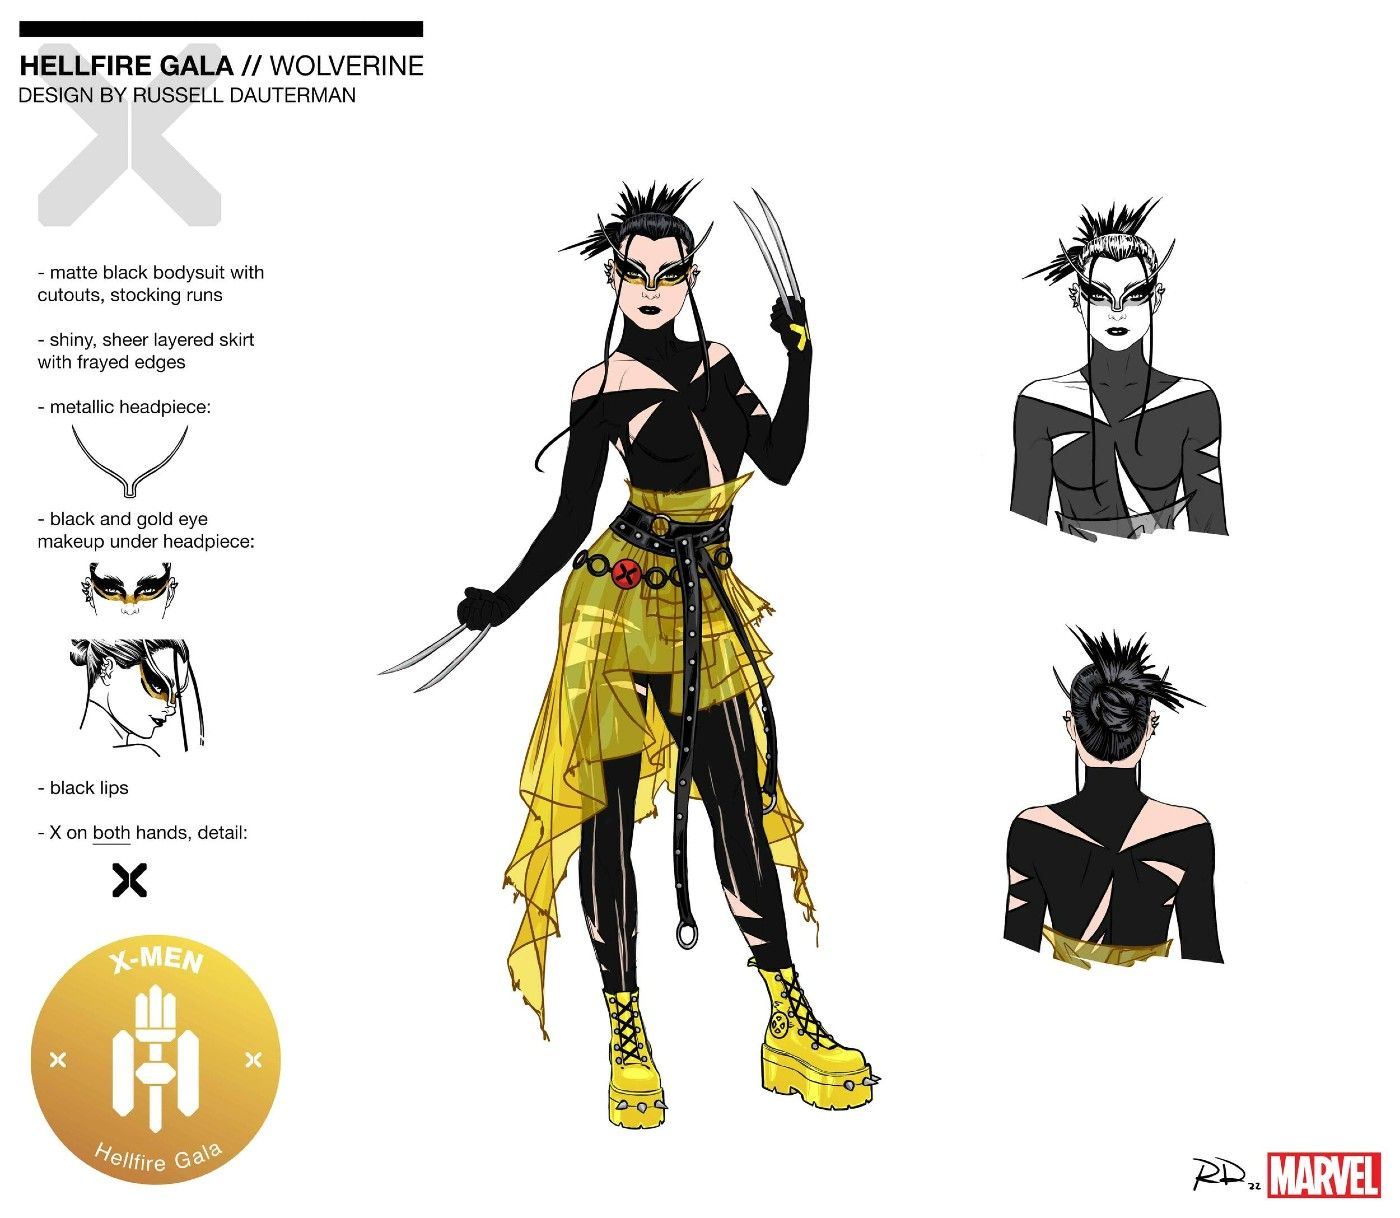 Marvel’s Costumes For Hellfire Gala 2022 Somehow Manage To Top Last Year